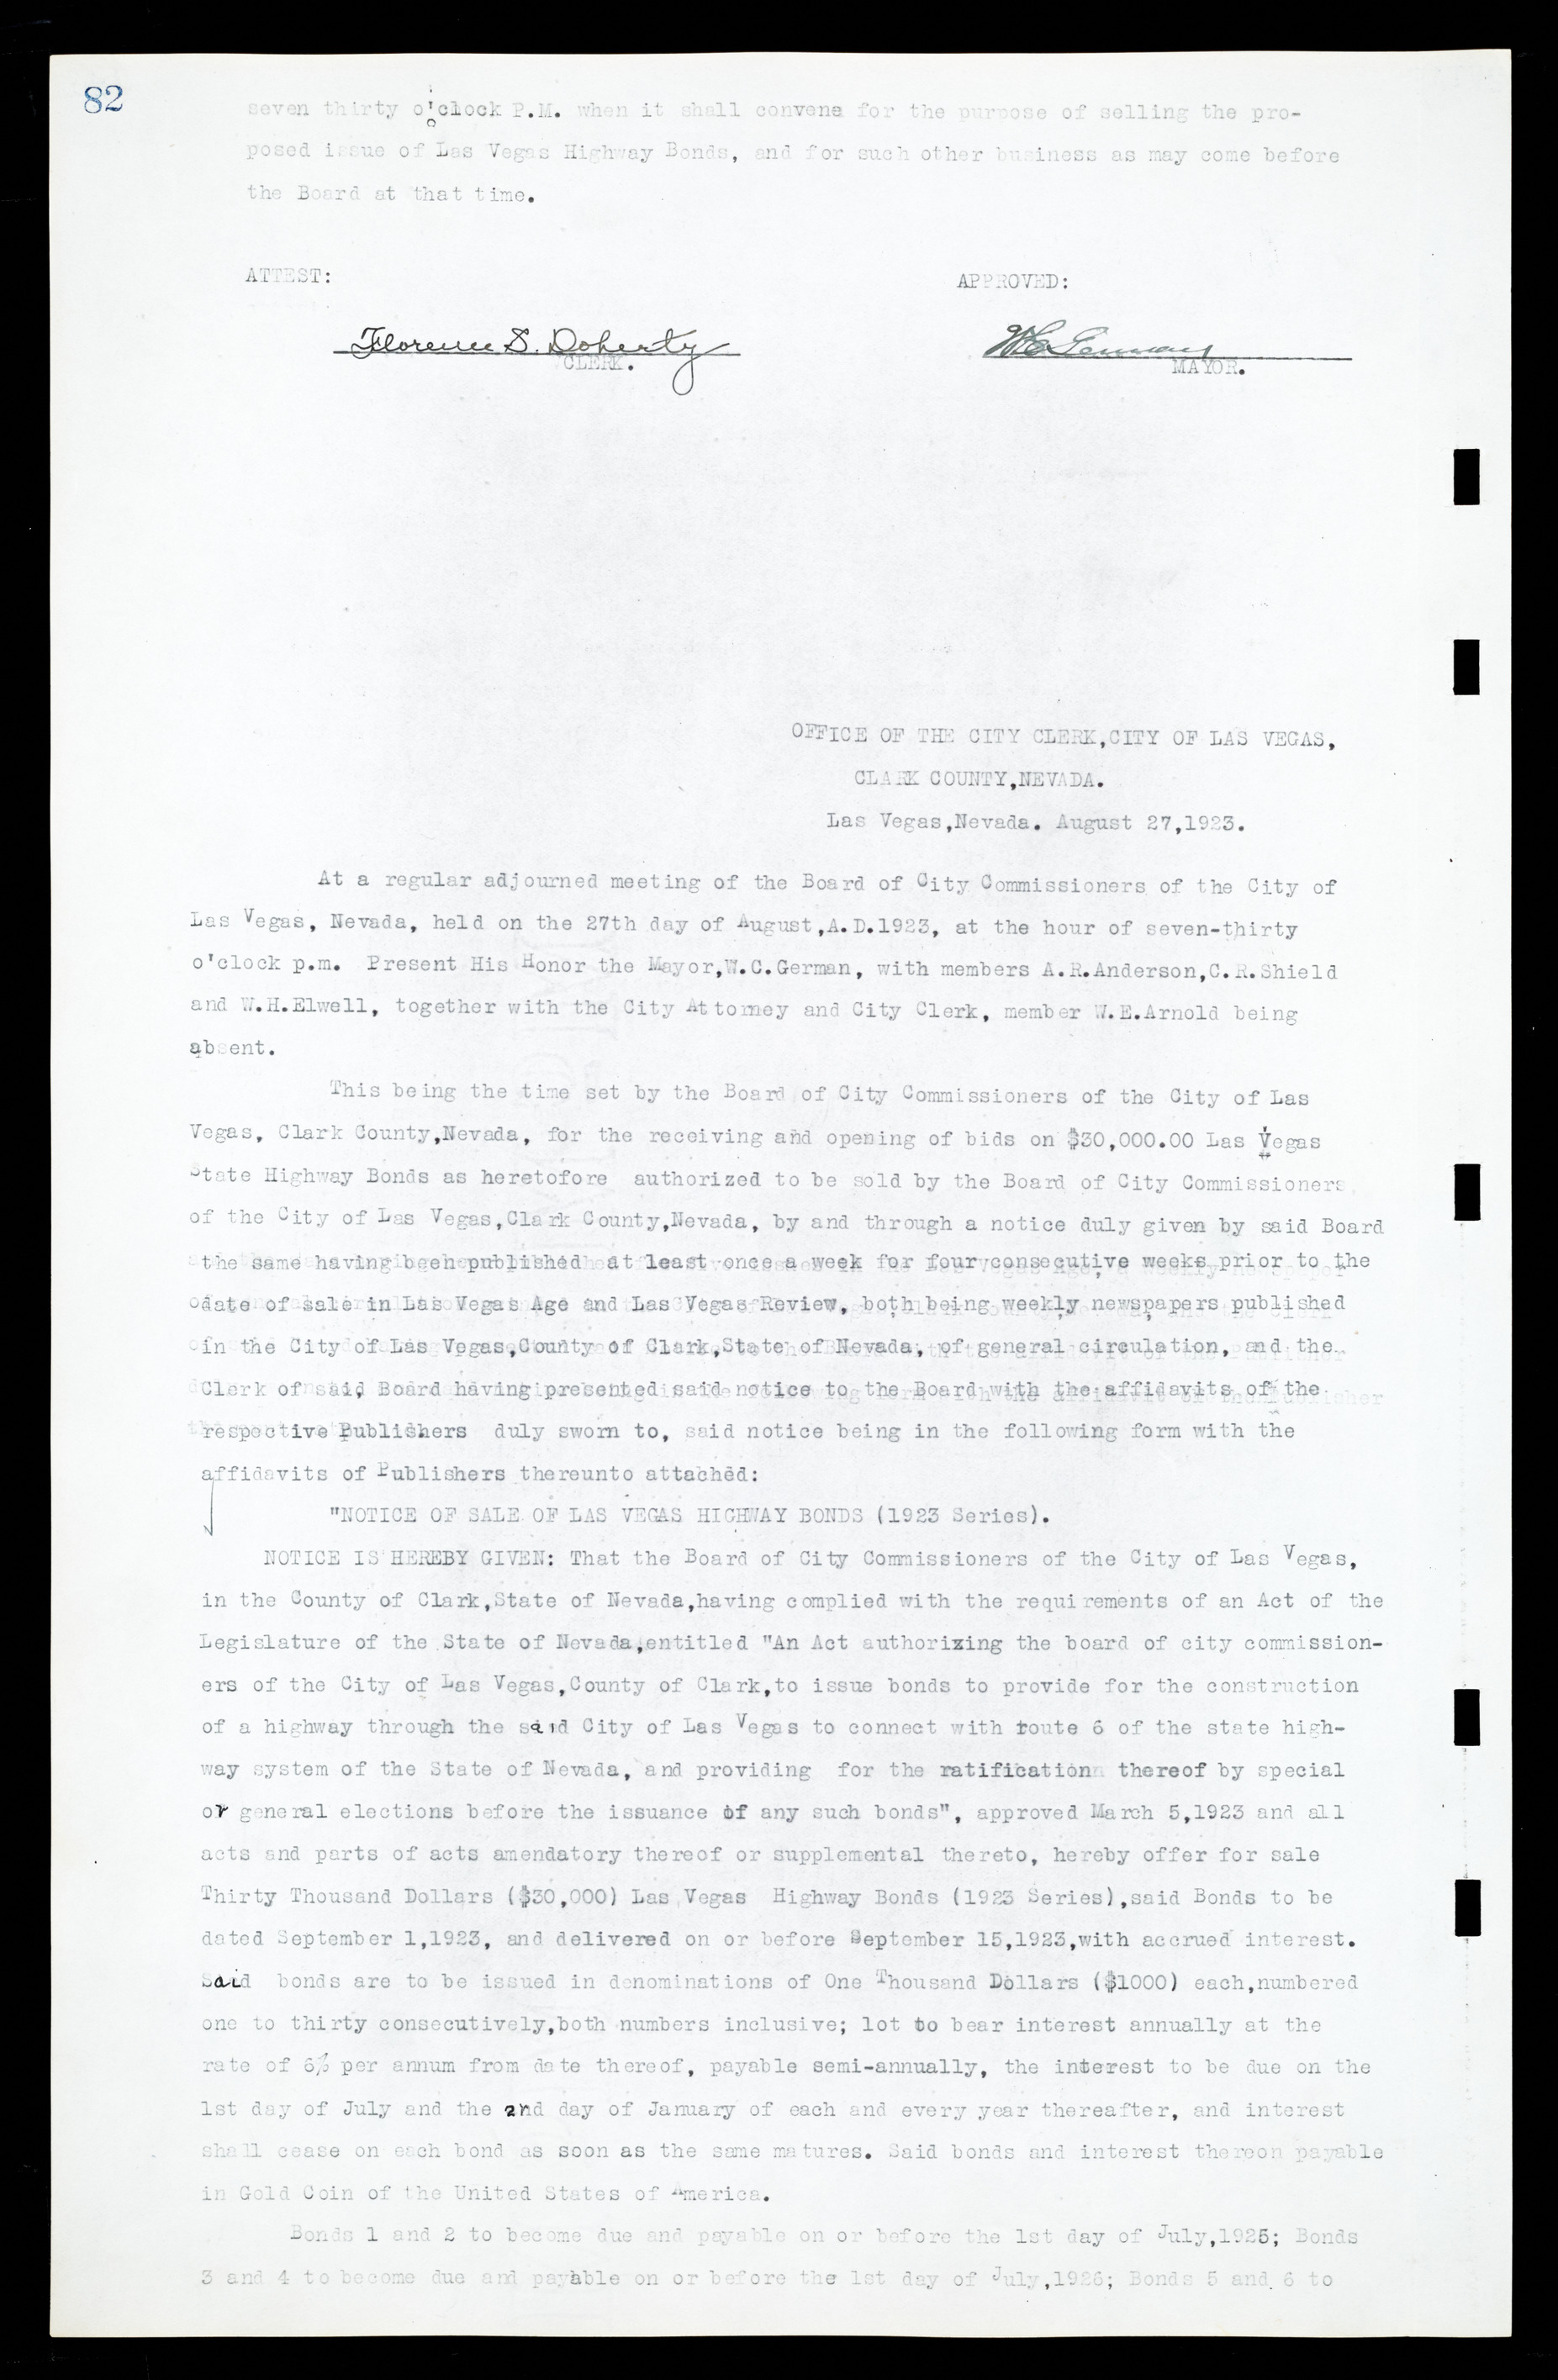 Las Vegas City Commission Minutes, March 1, 1922 to May 10, 1929, lvc000002-89